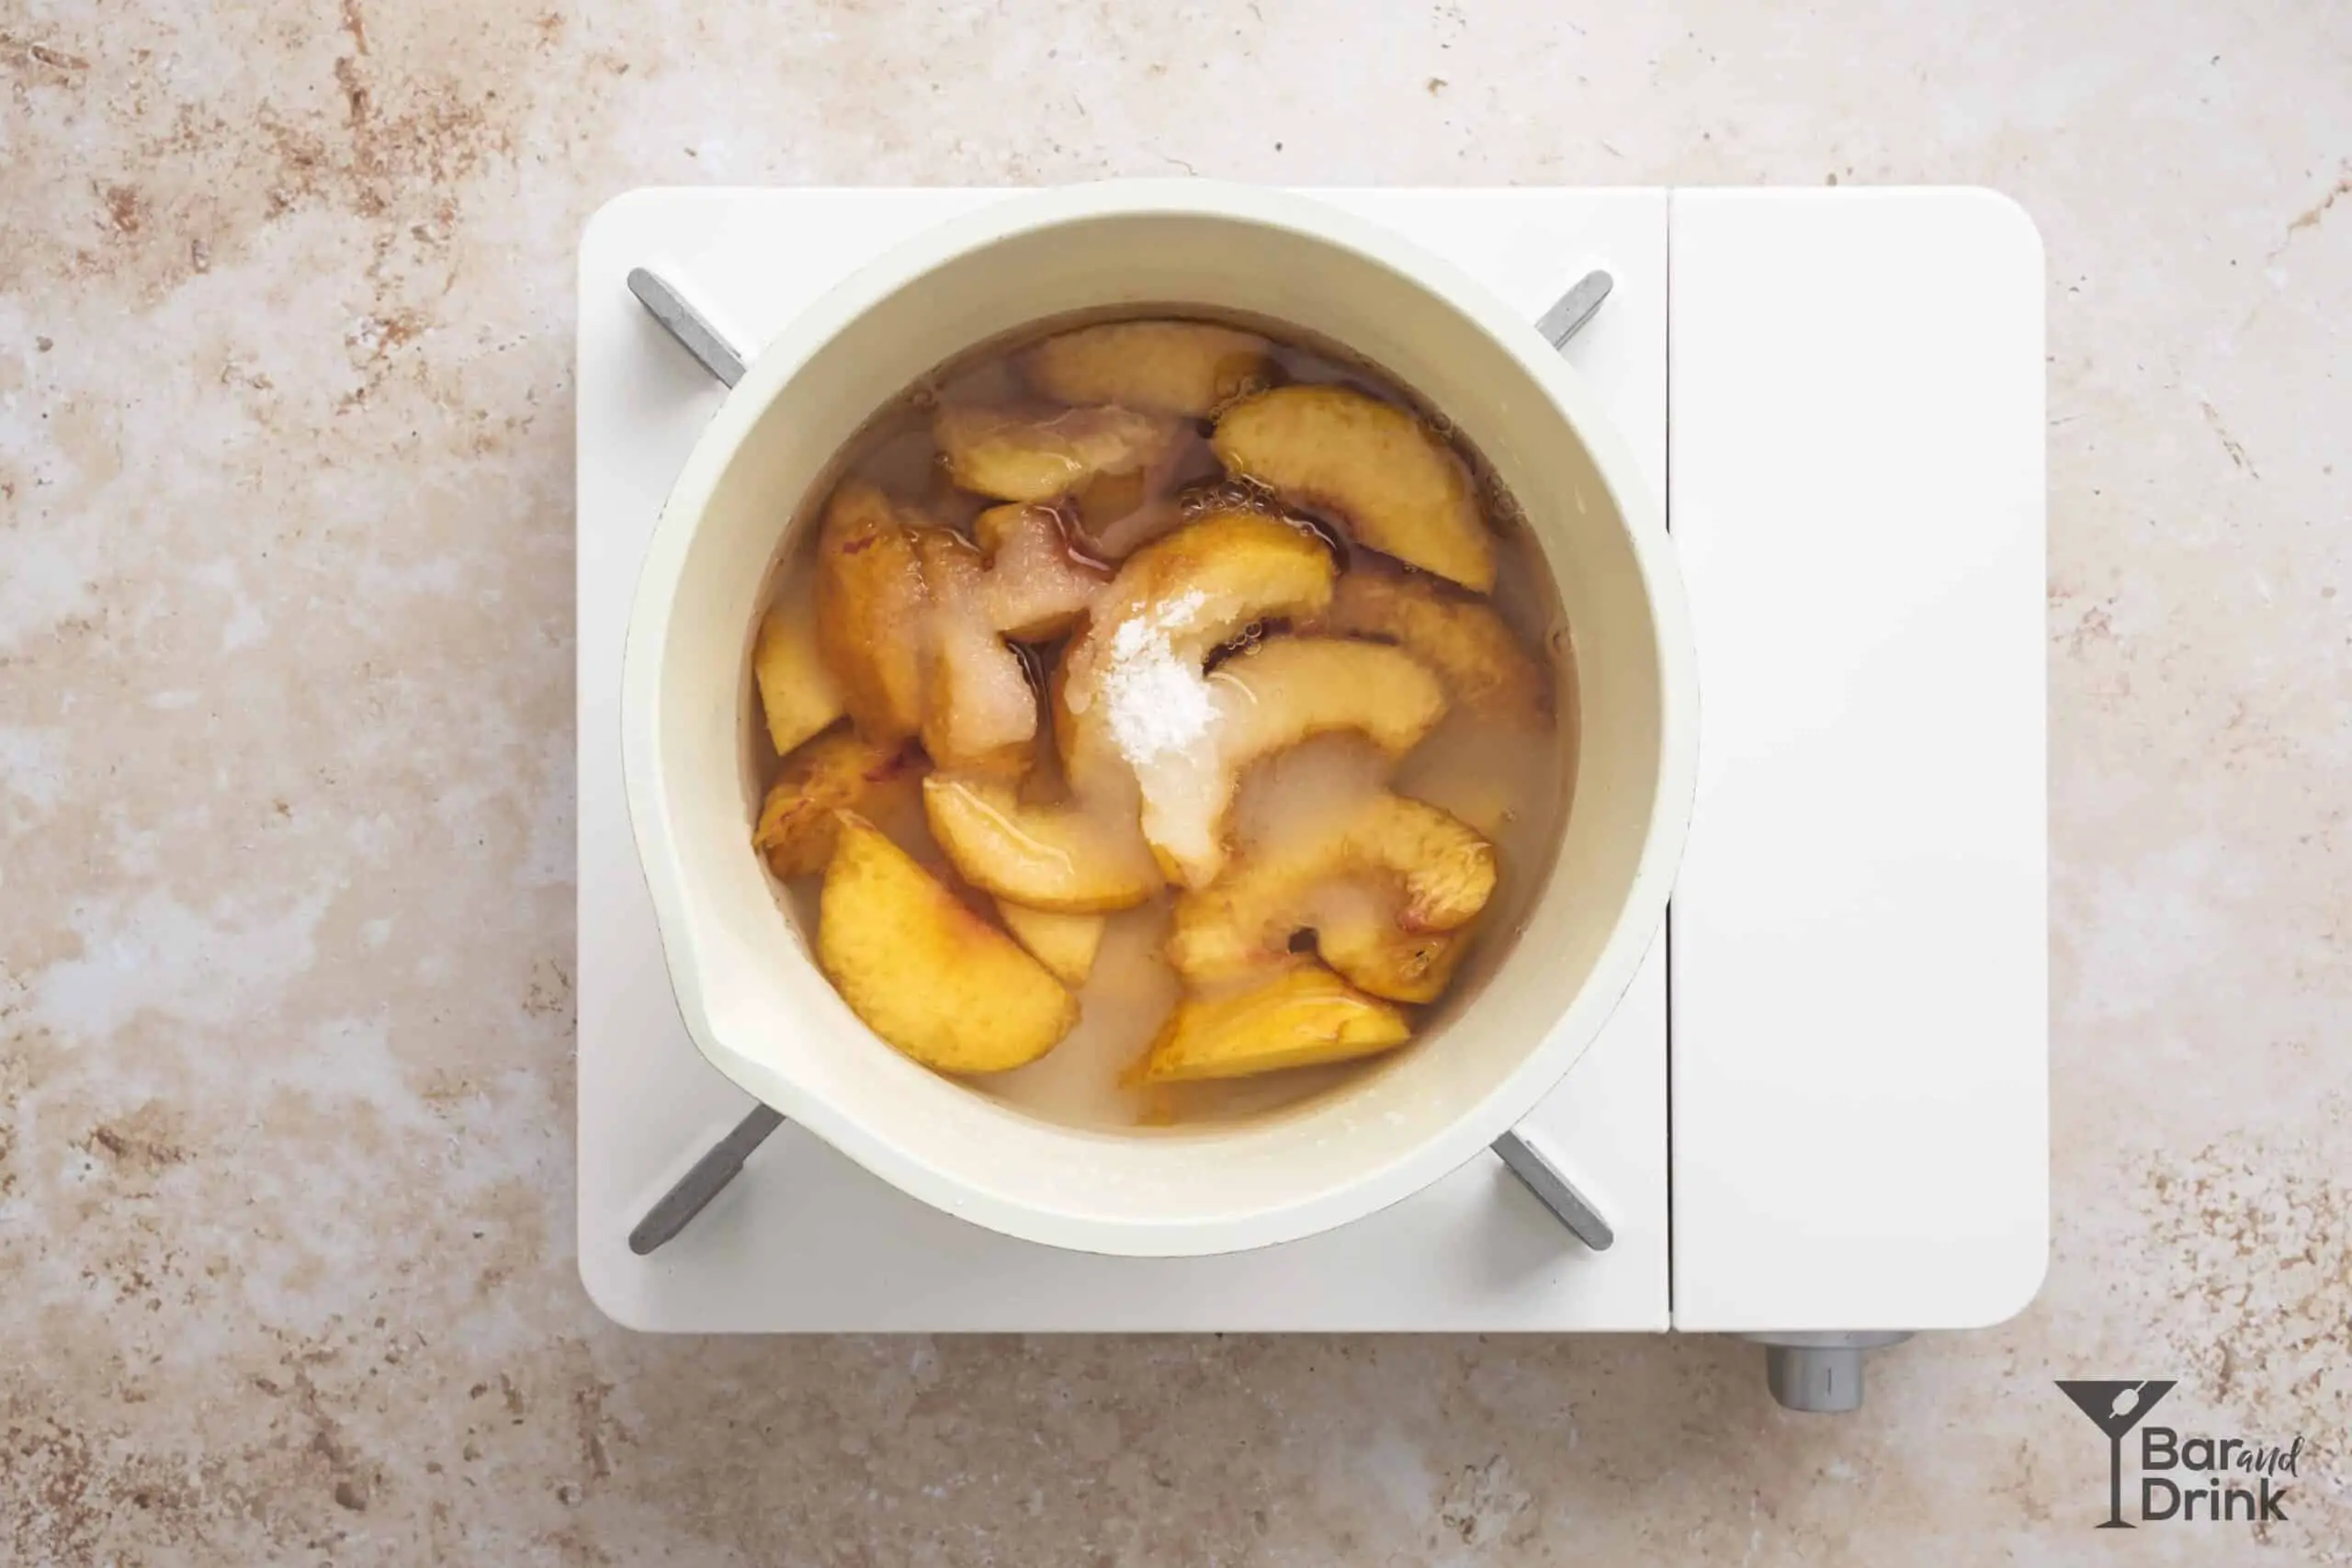 peach whiskey sour process water and sugar sauce pan